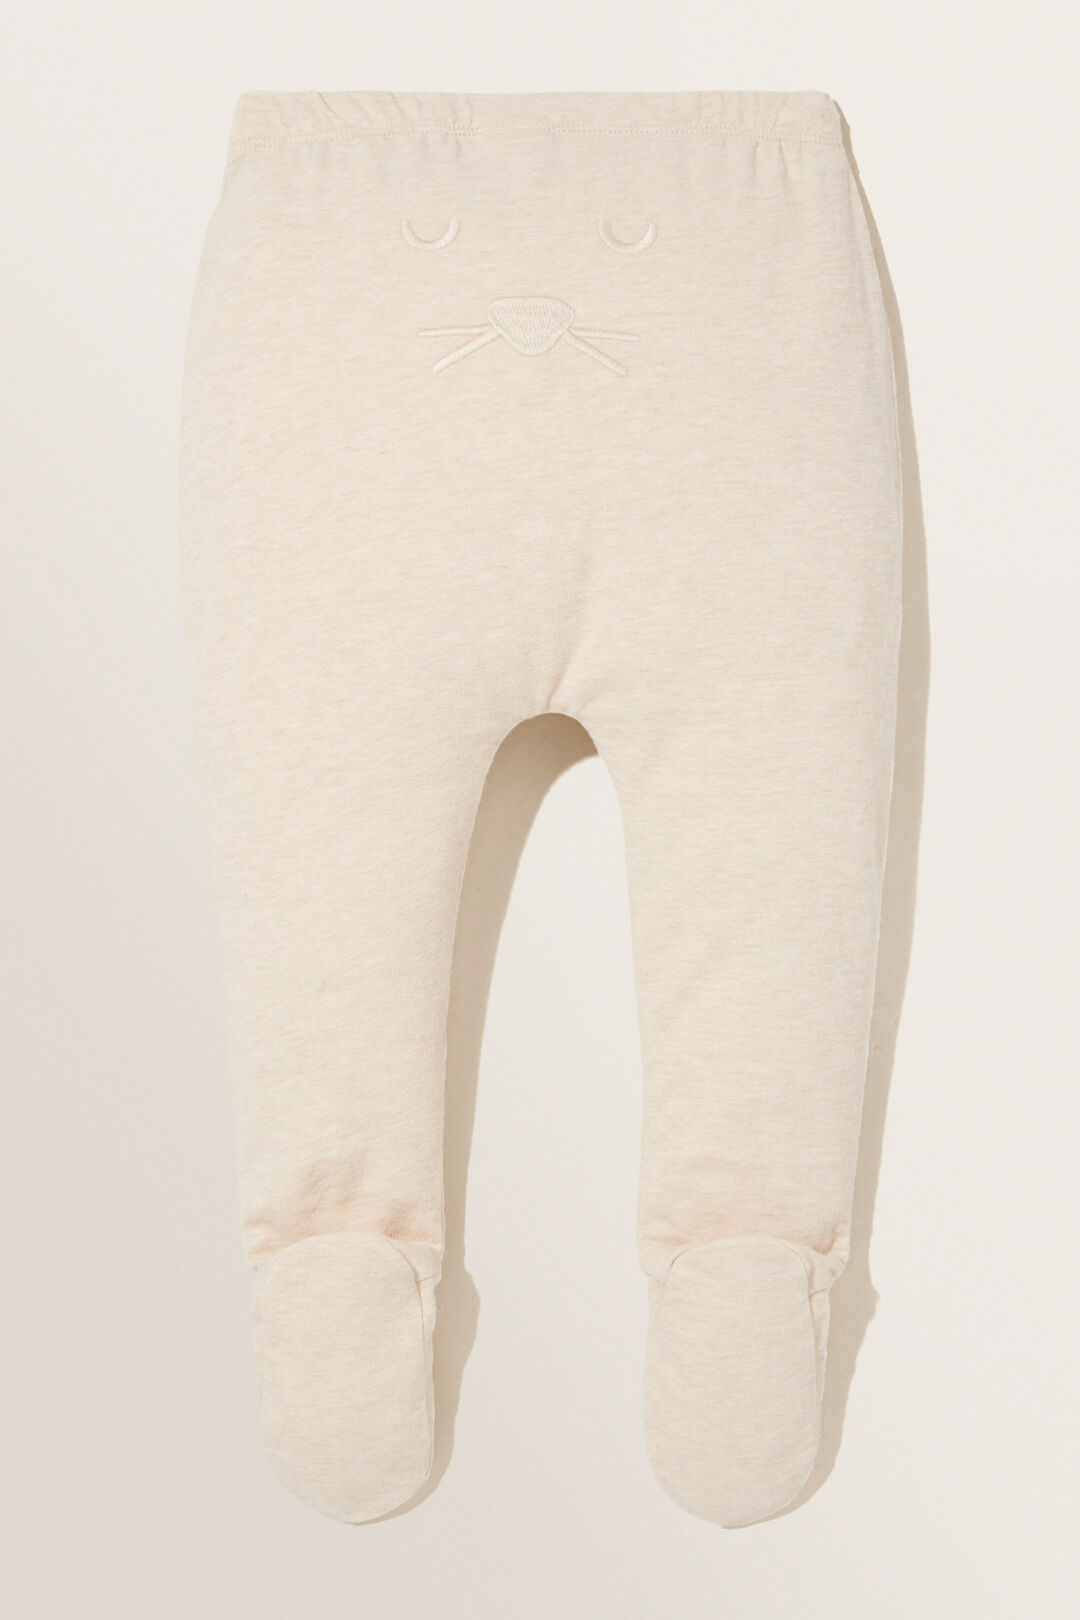 Footed Bunny Bum Leggings  Wheat Marle  hi-res